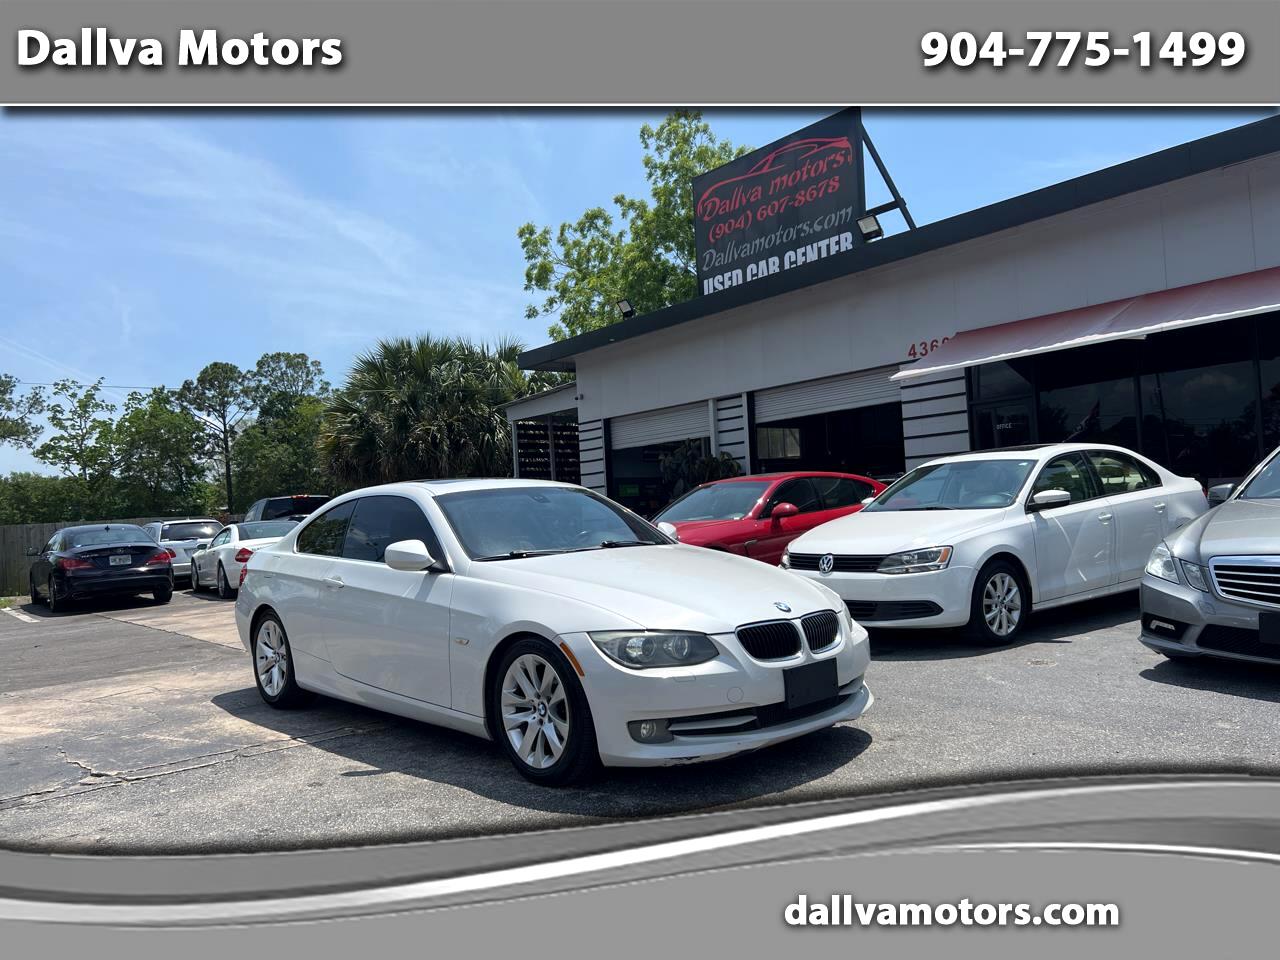 BMW 3-Series 328i Coupe 2012